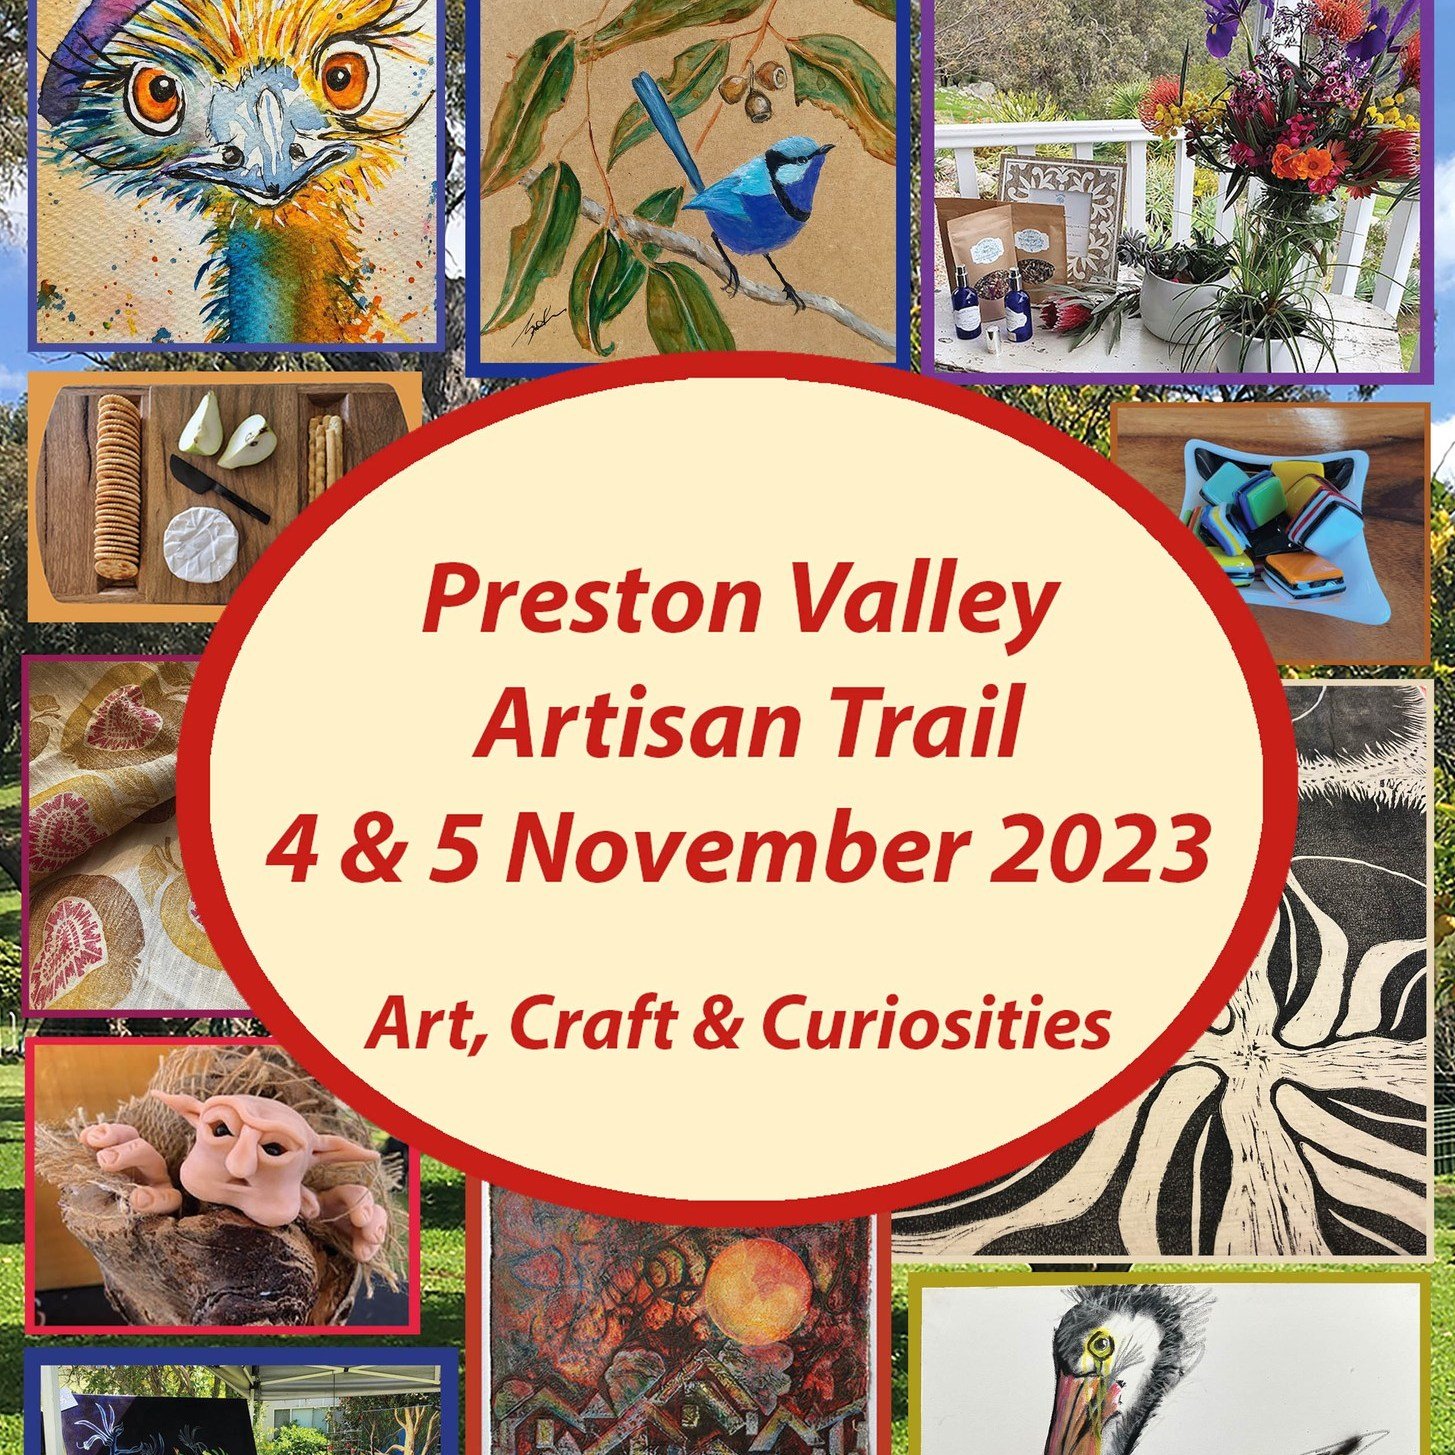 URGENT ARTIST CALL OUT...
a couple of spots have suddently become available on the Trail 4th &amp; 5th November.  Message us if you'd like to be part of this great arty weekend. www.prestonvalleyartisantrail.com.au